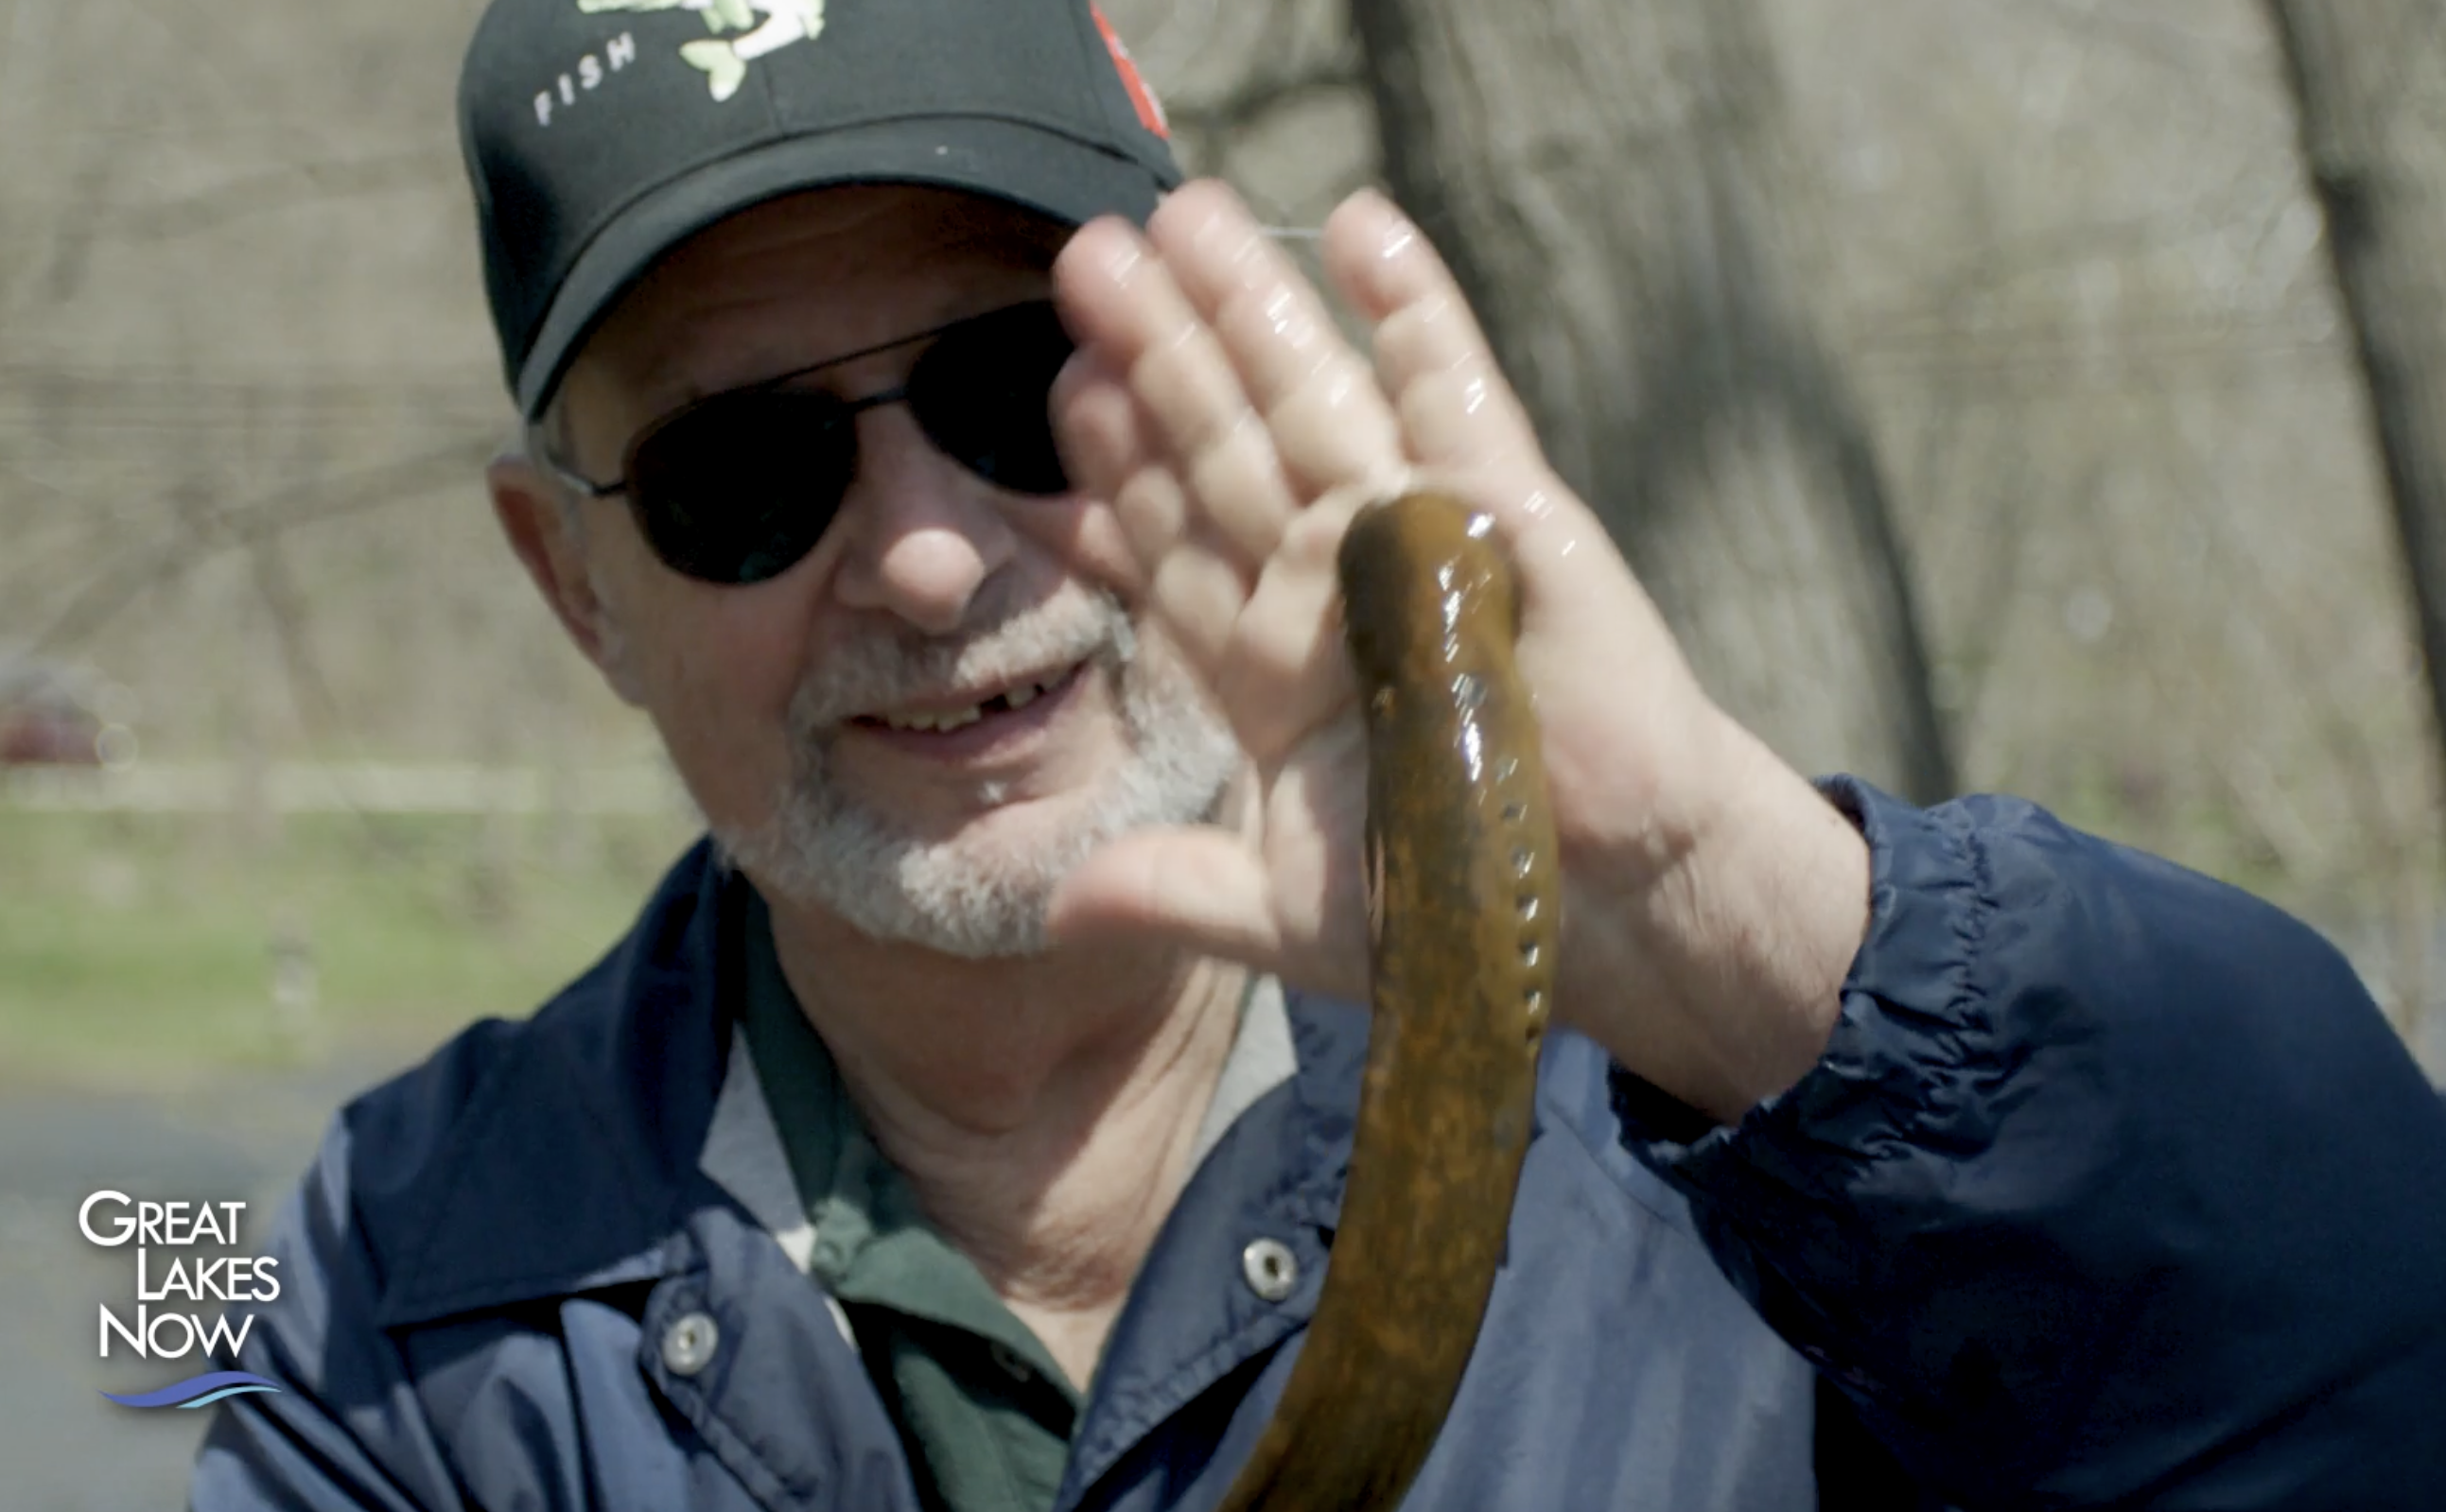 Lamprey attached to man's hand